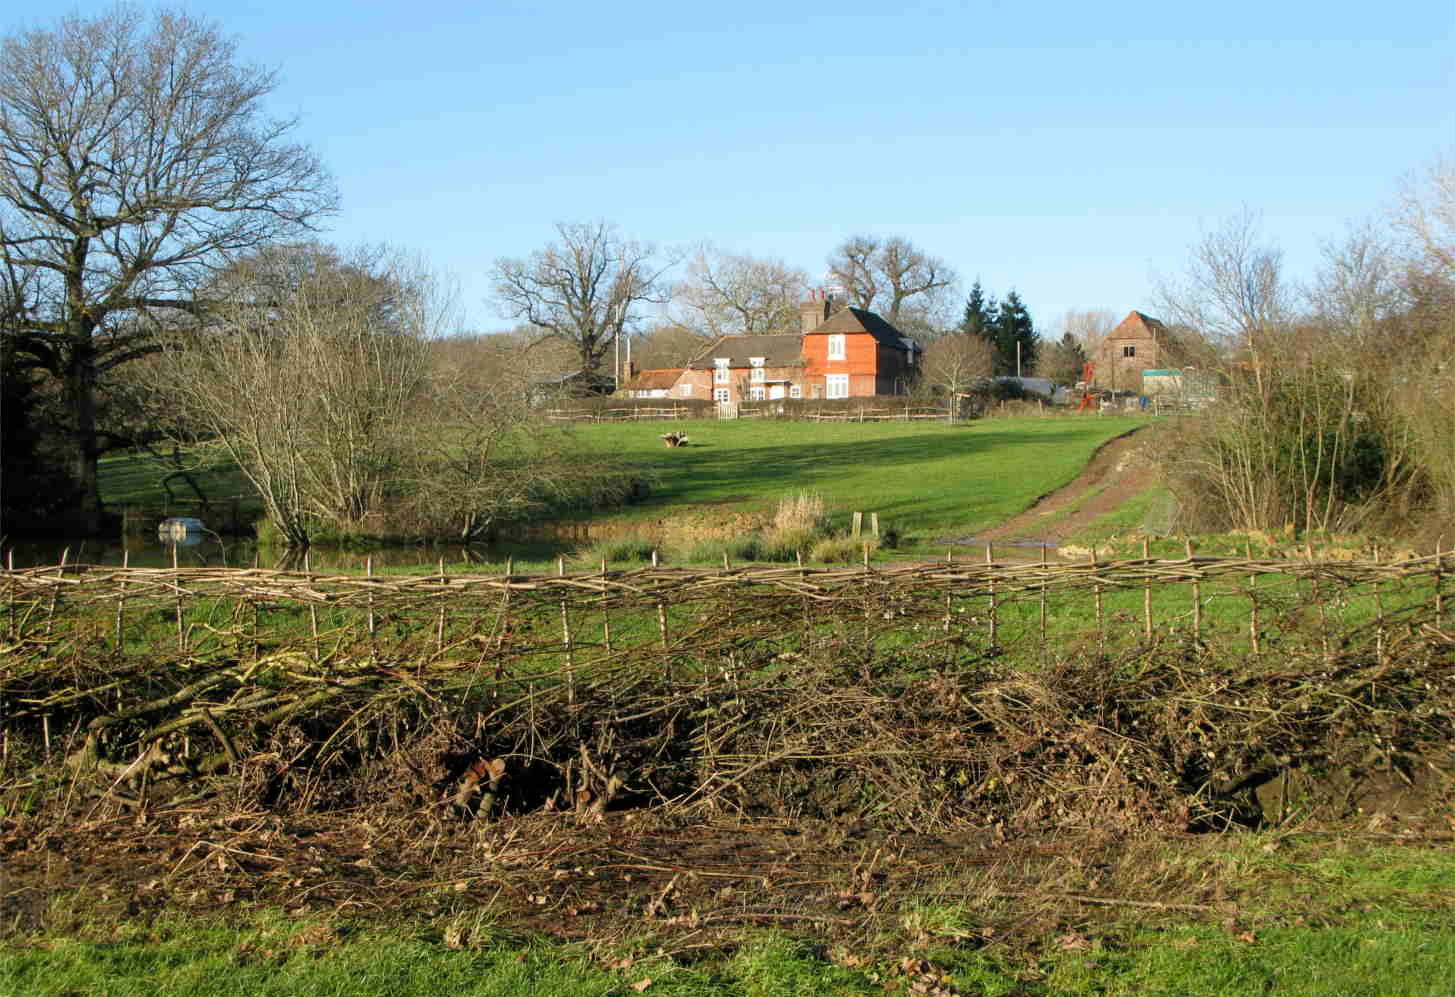 Farmhouse from the lake with hedge laying in front